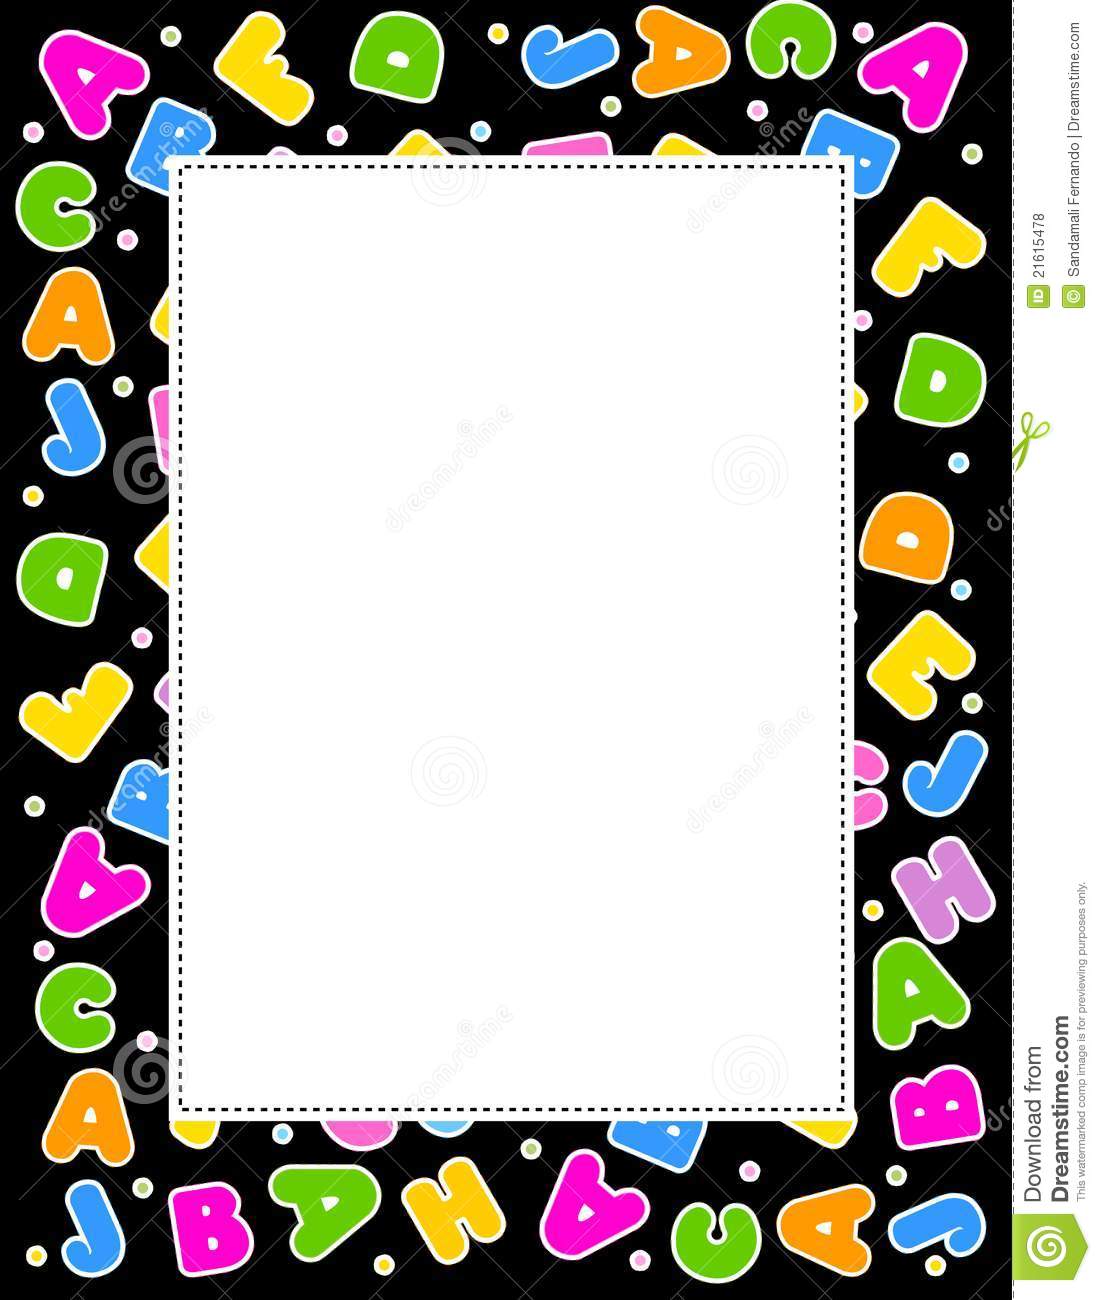 And Colorful Alphabet Border On Black Background  A To Z Alphabet